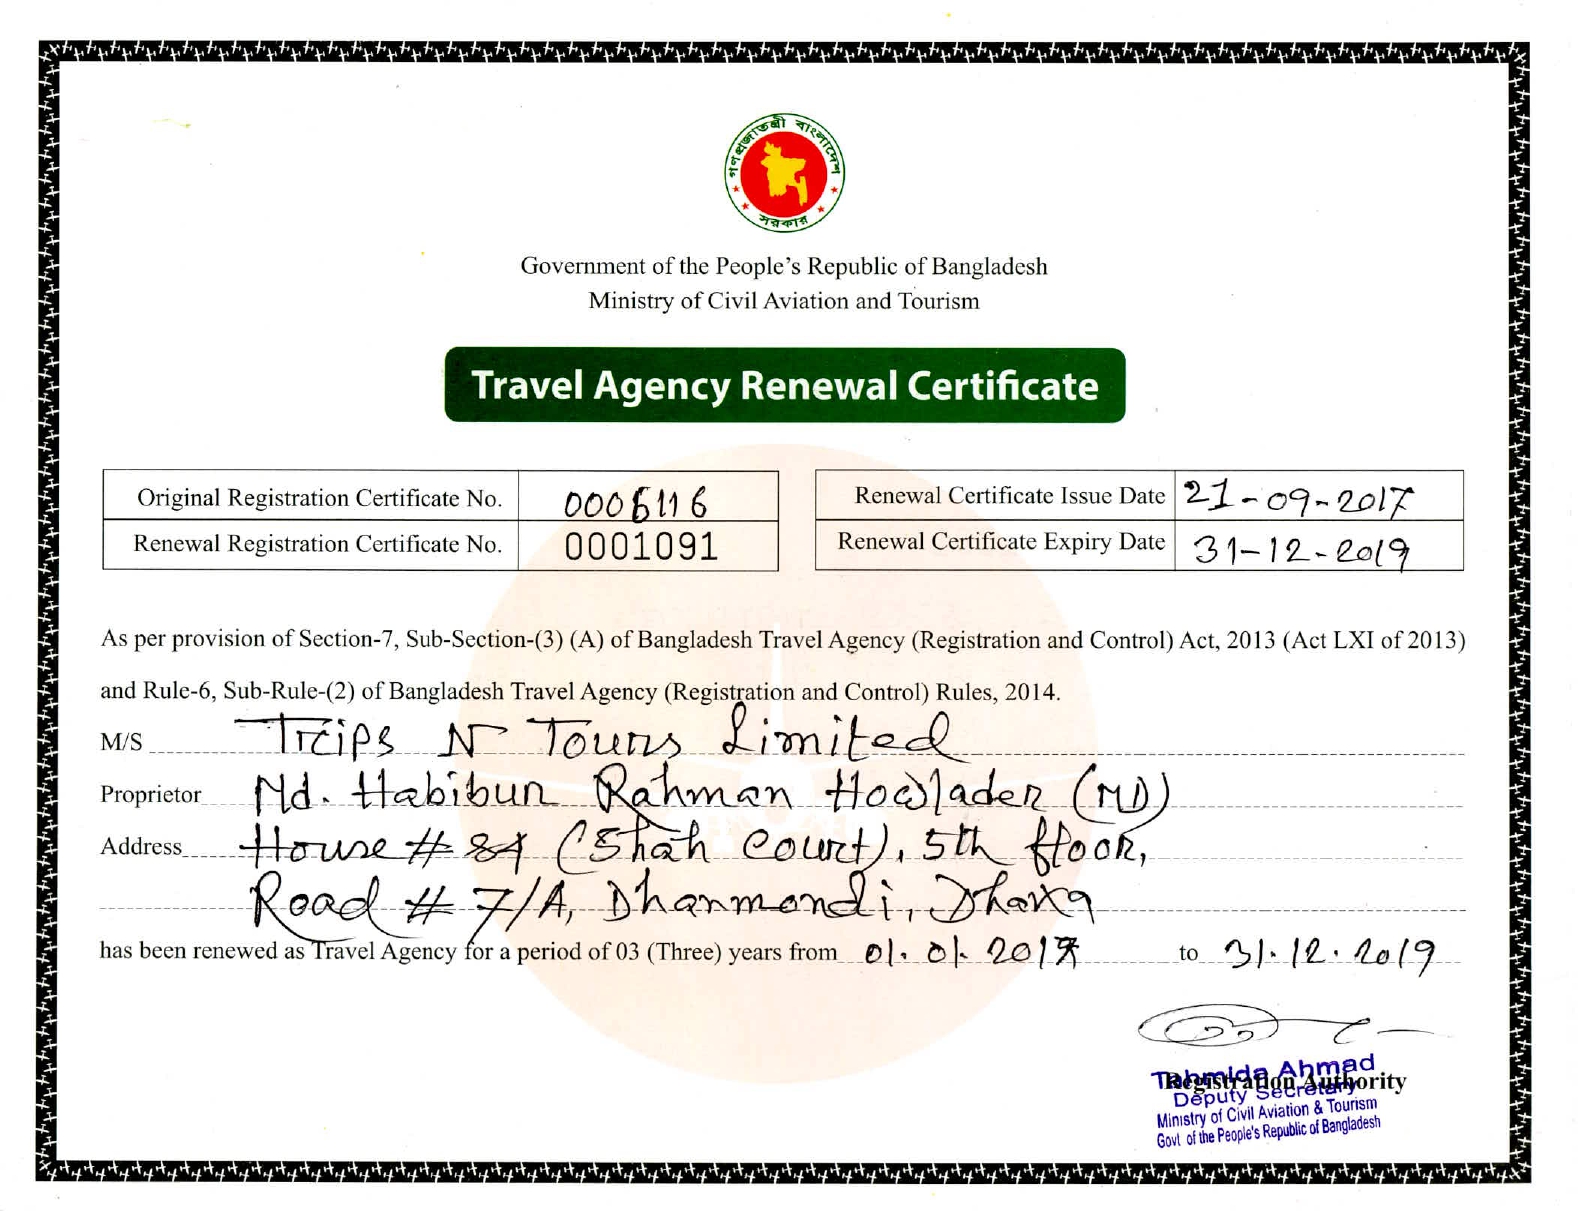 tour and travel agency license